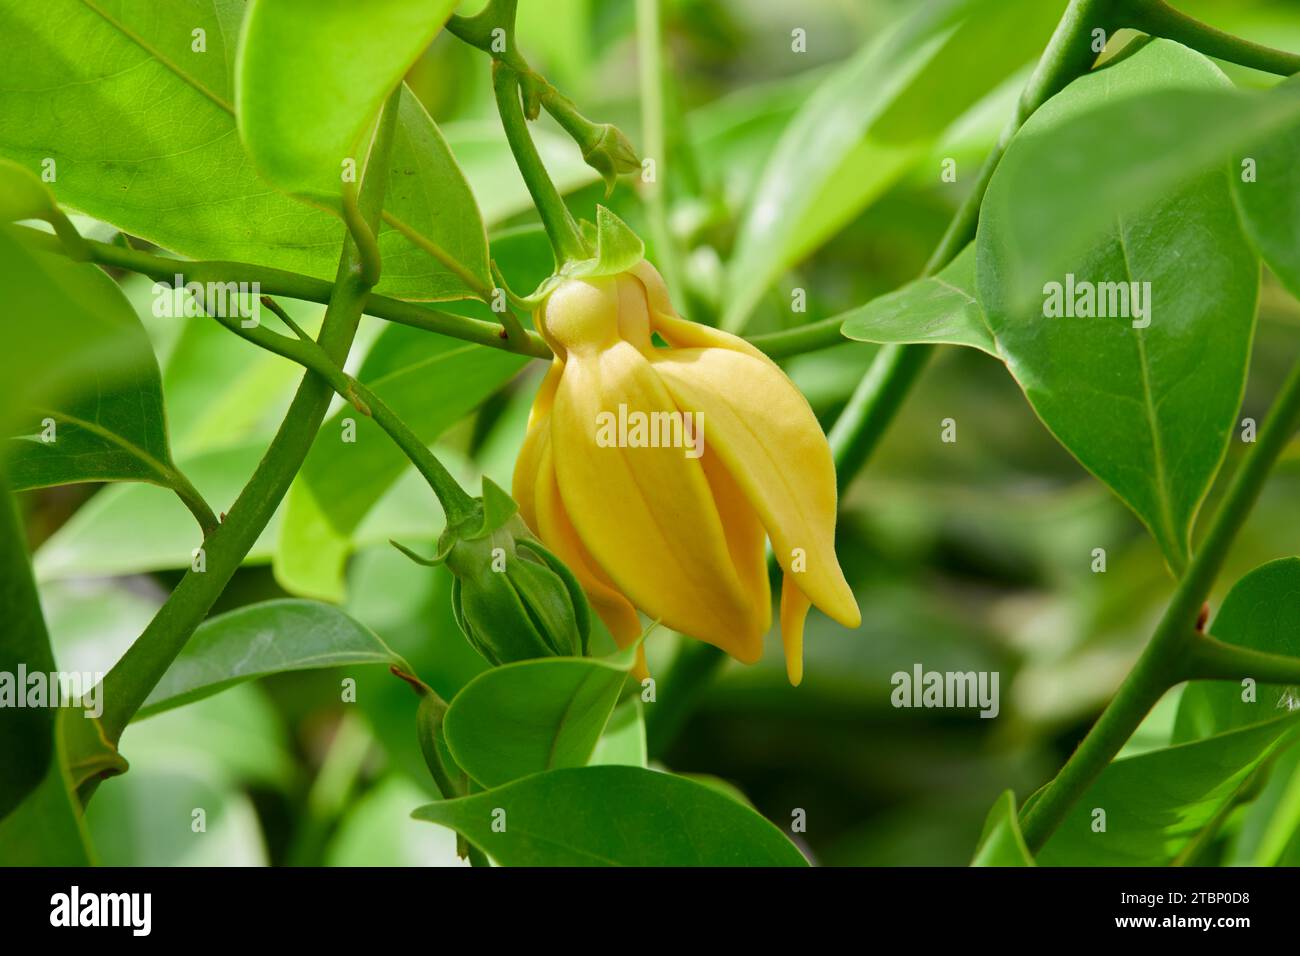 Close-up view of climbing ylang-ylang flower blooming on tree branch Stock Photo